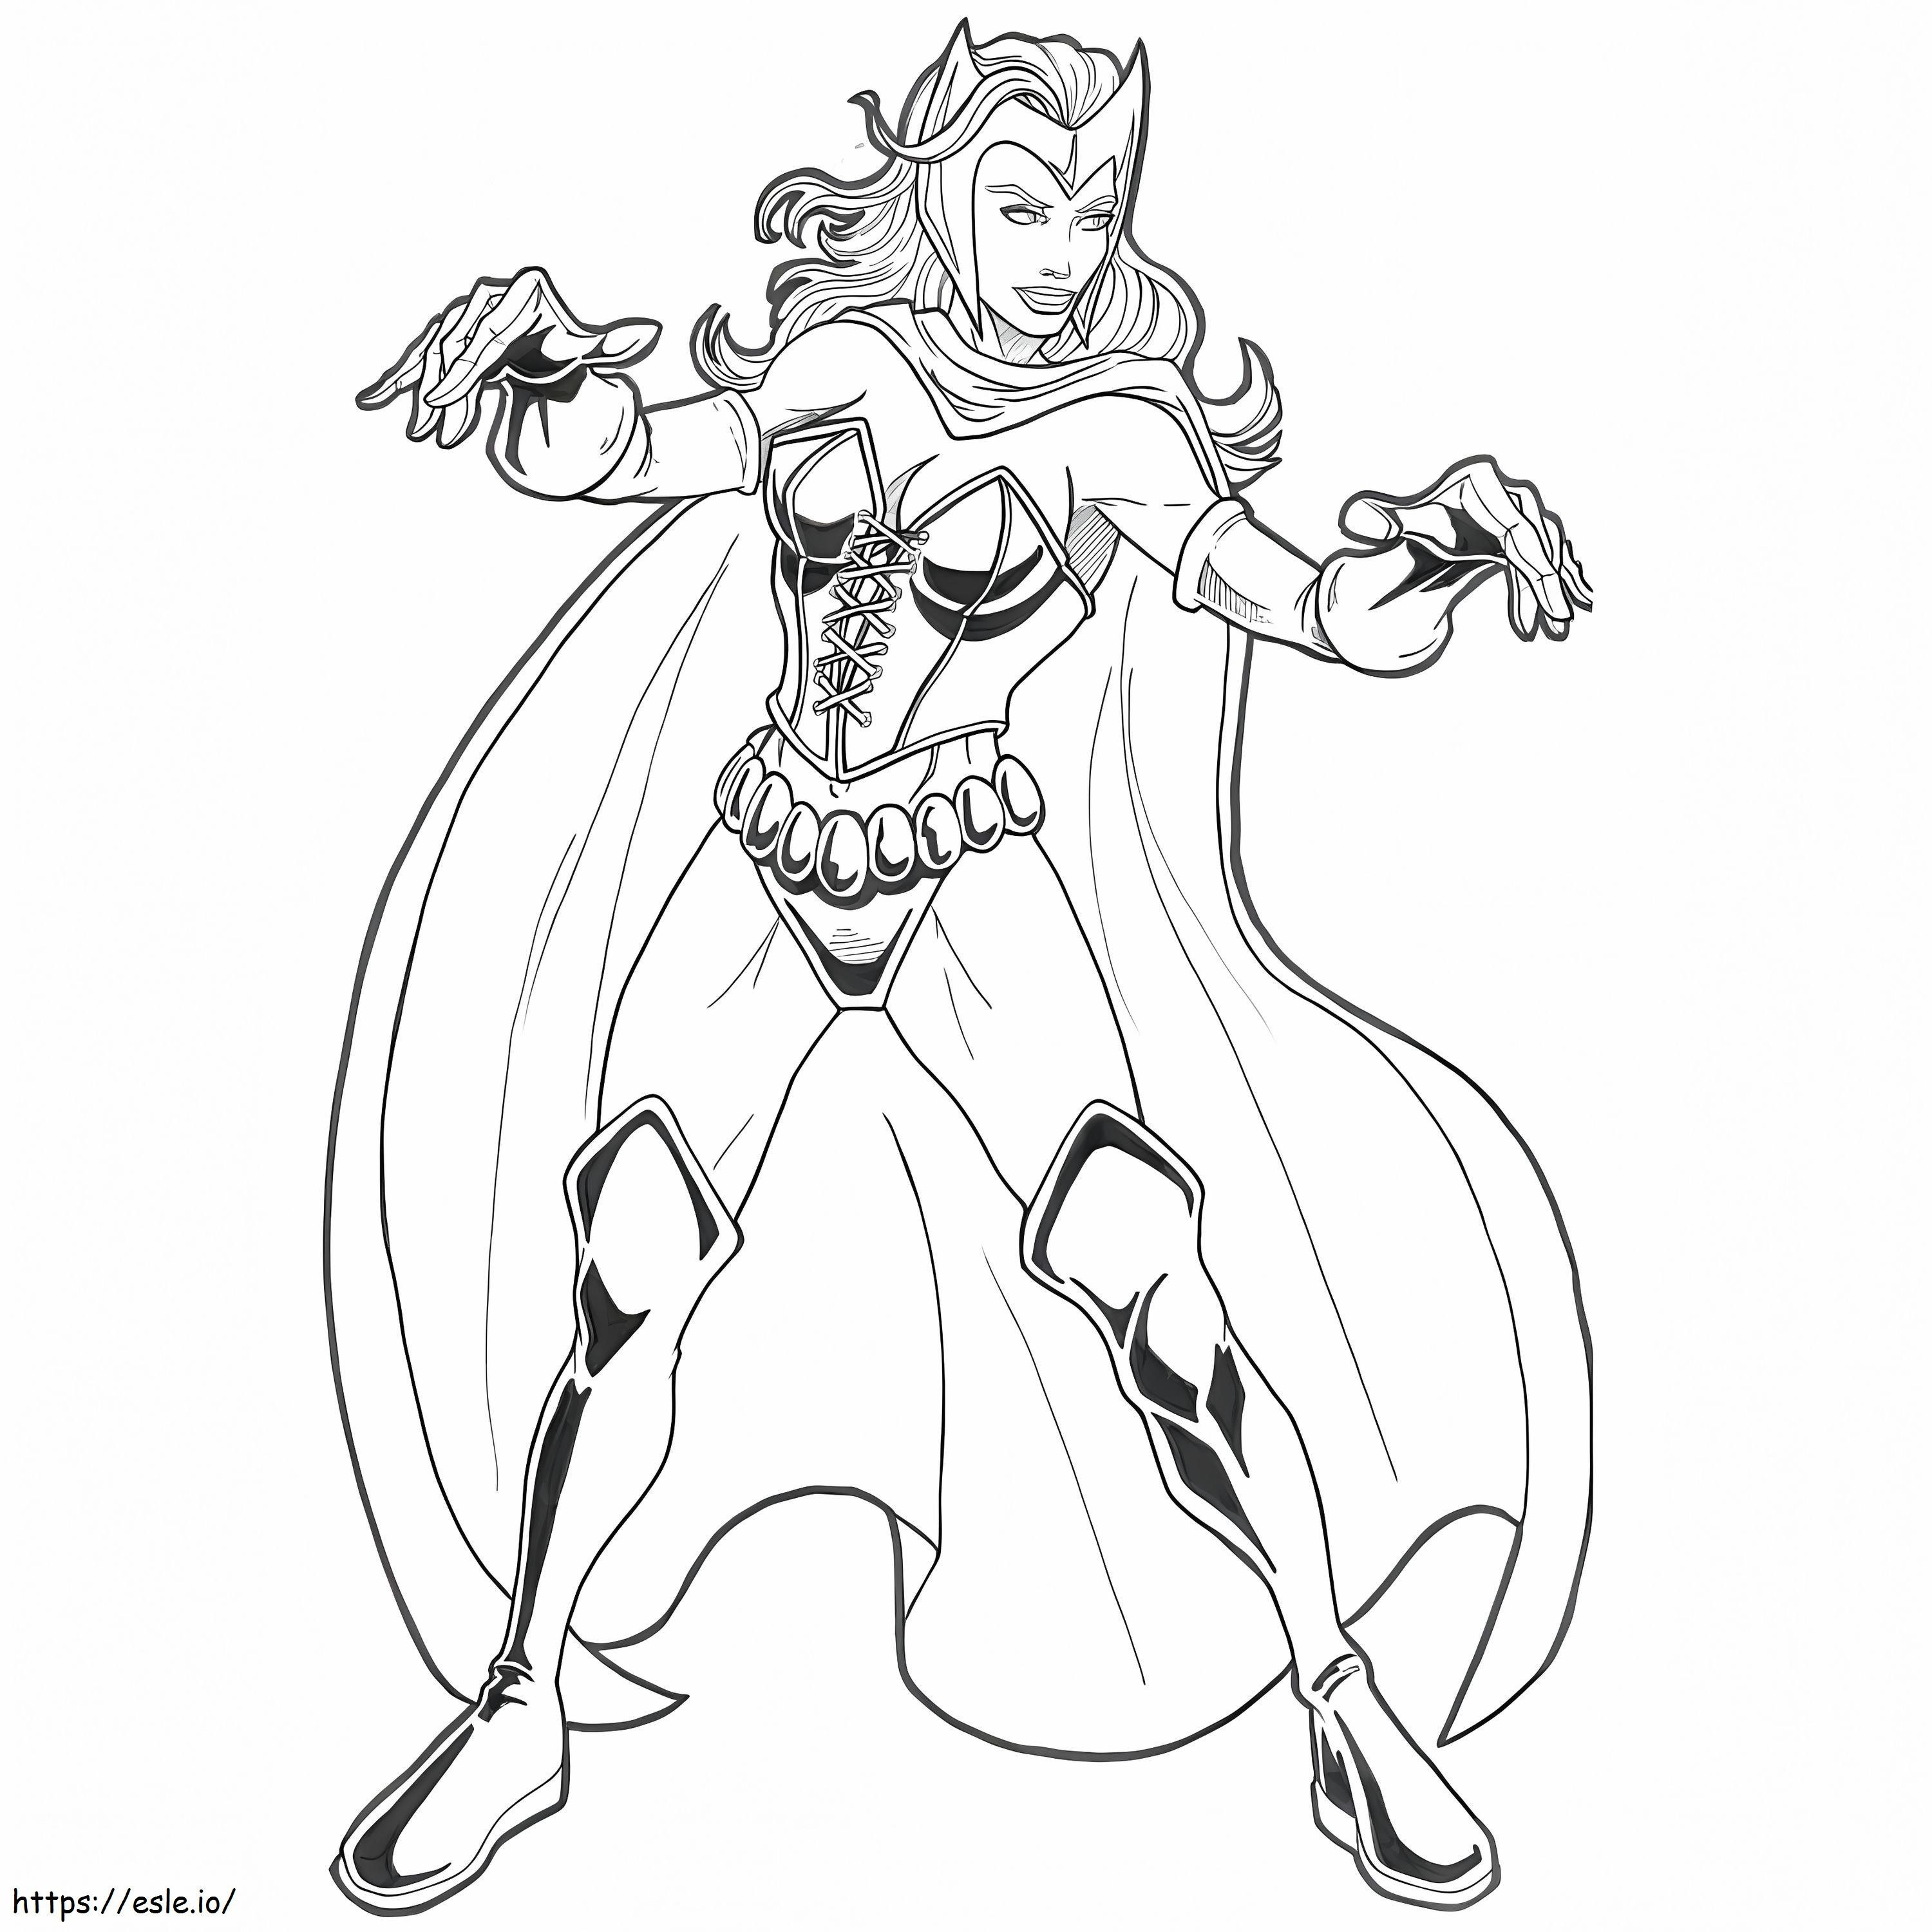 Scarlet Witch By WandaVision coloring page